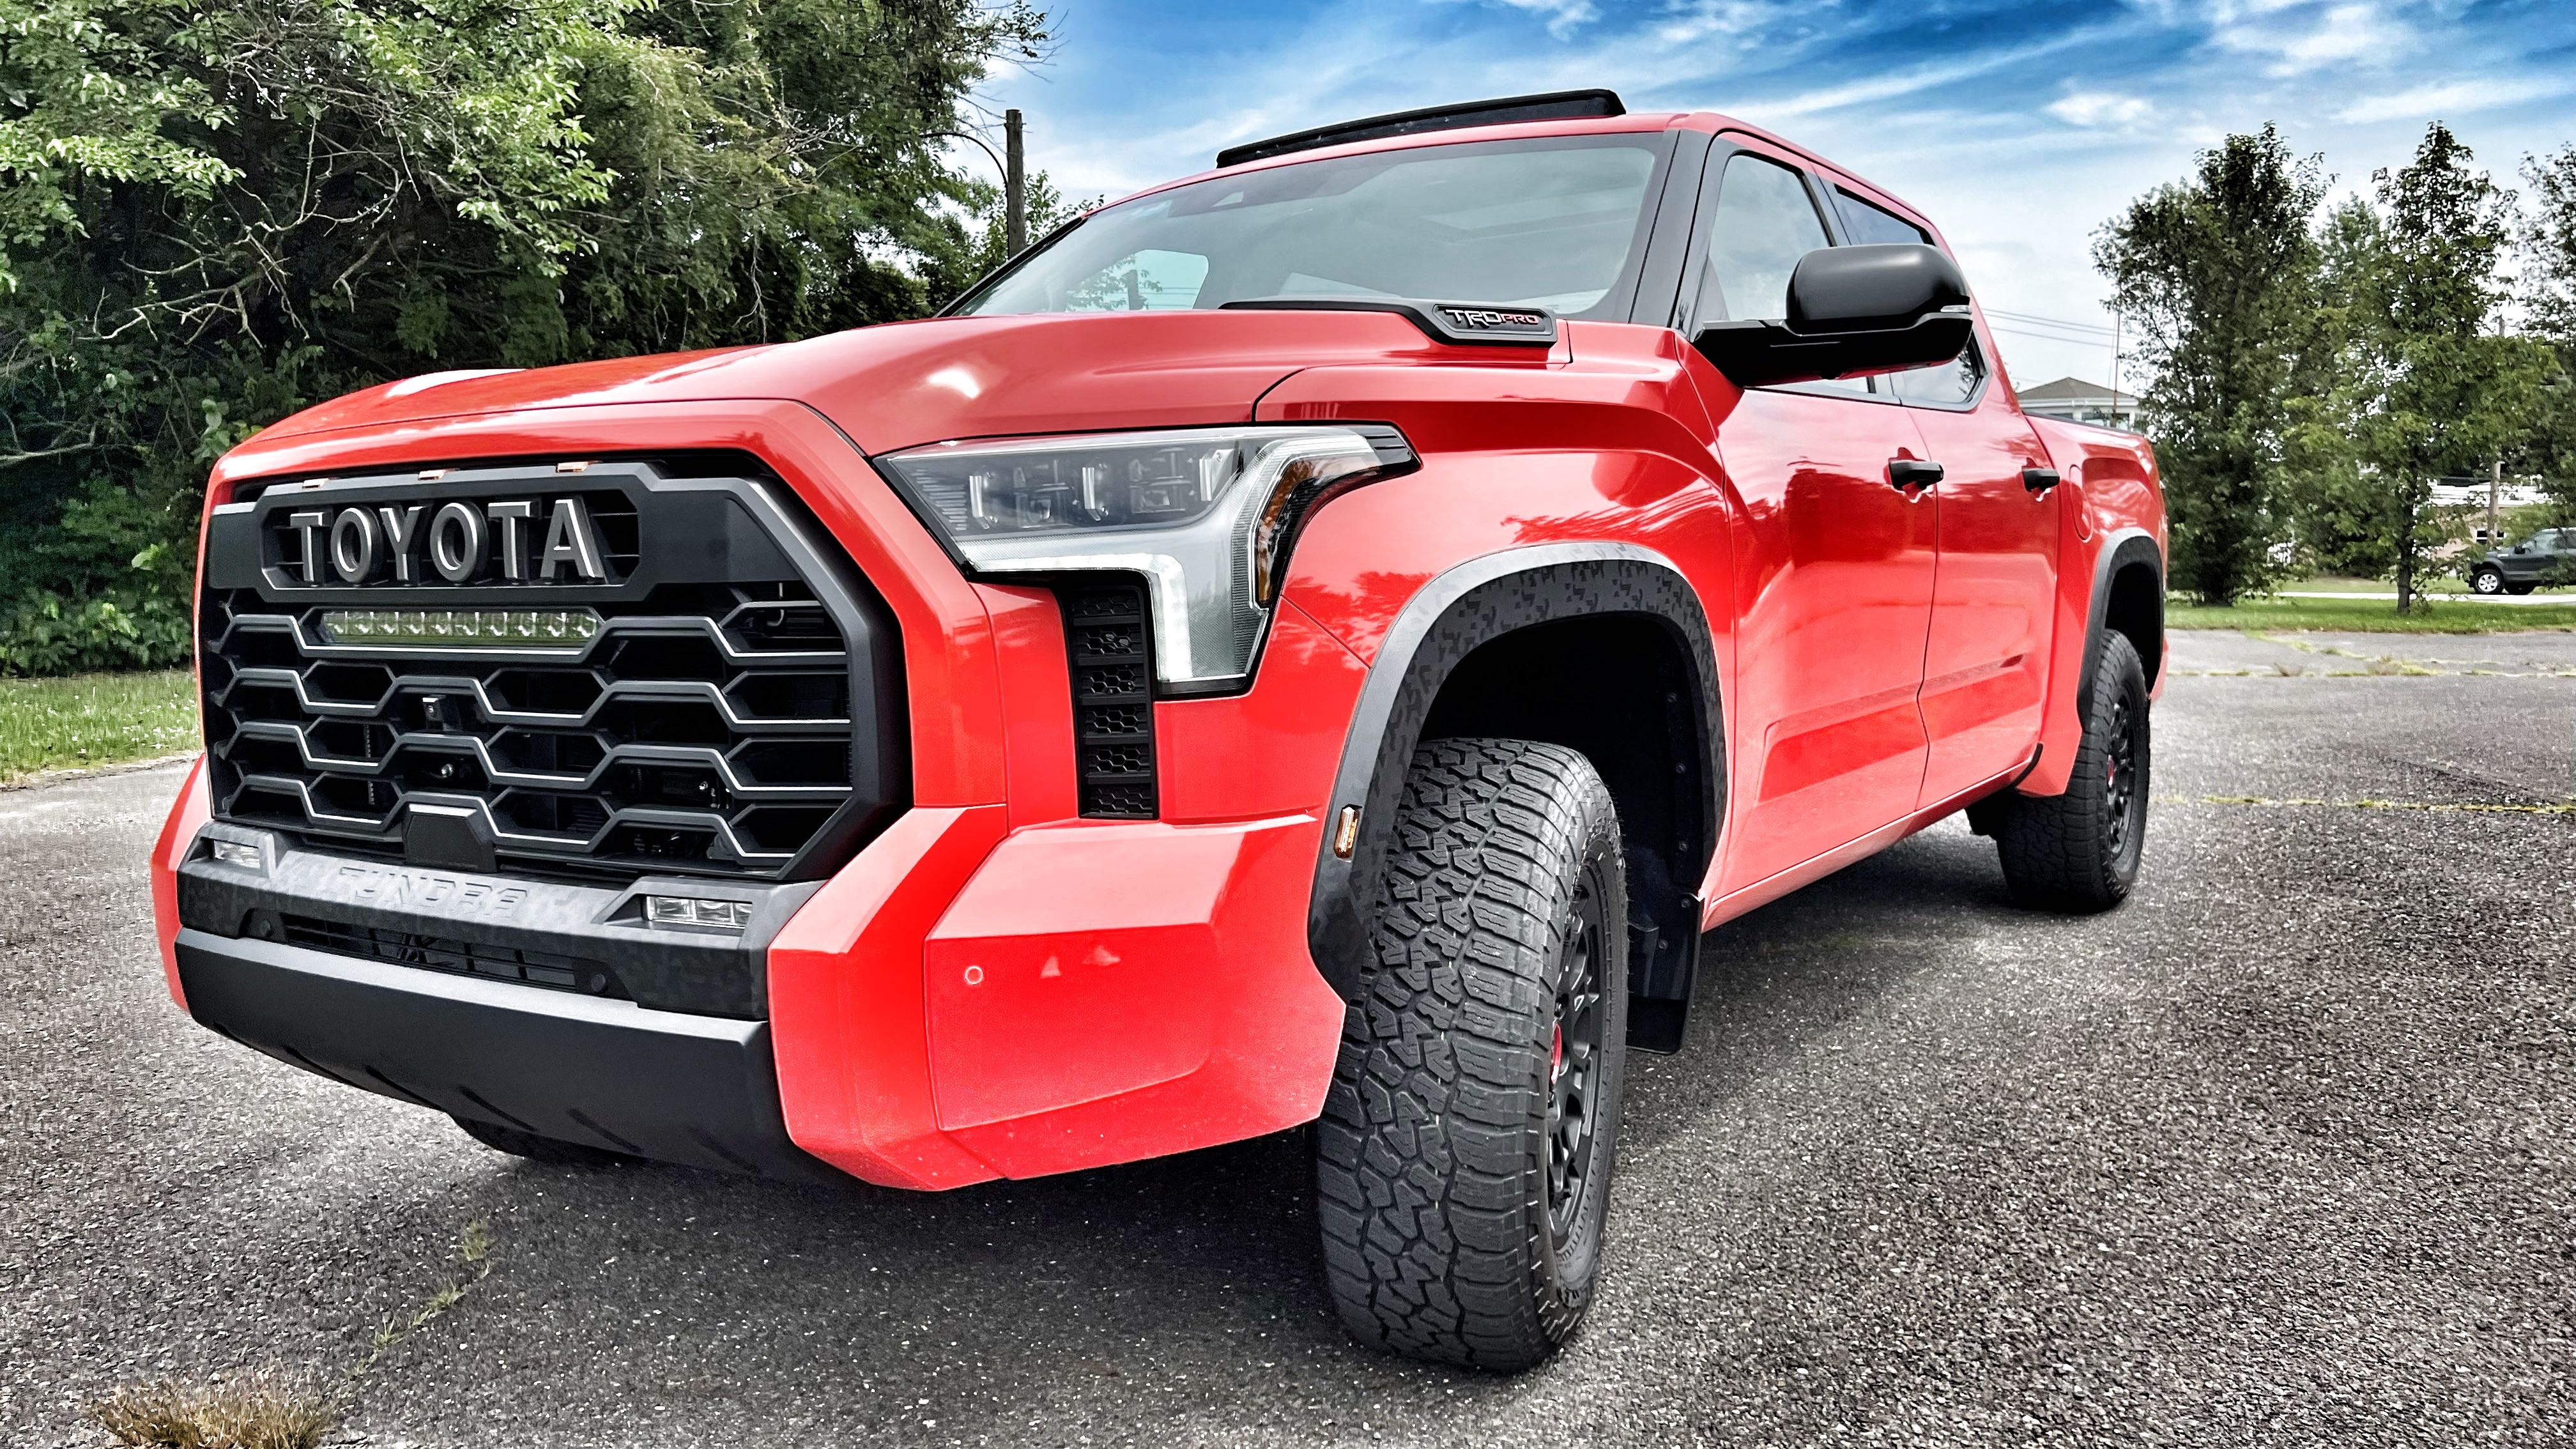 Ready for Adventures with the 2022 Toyota Tundra
